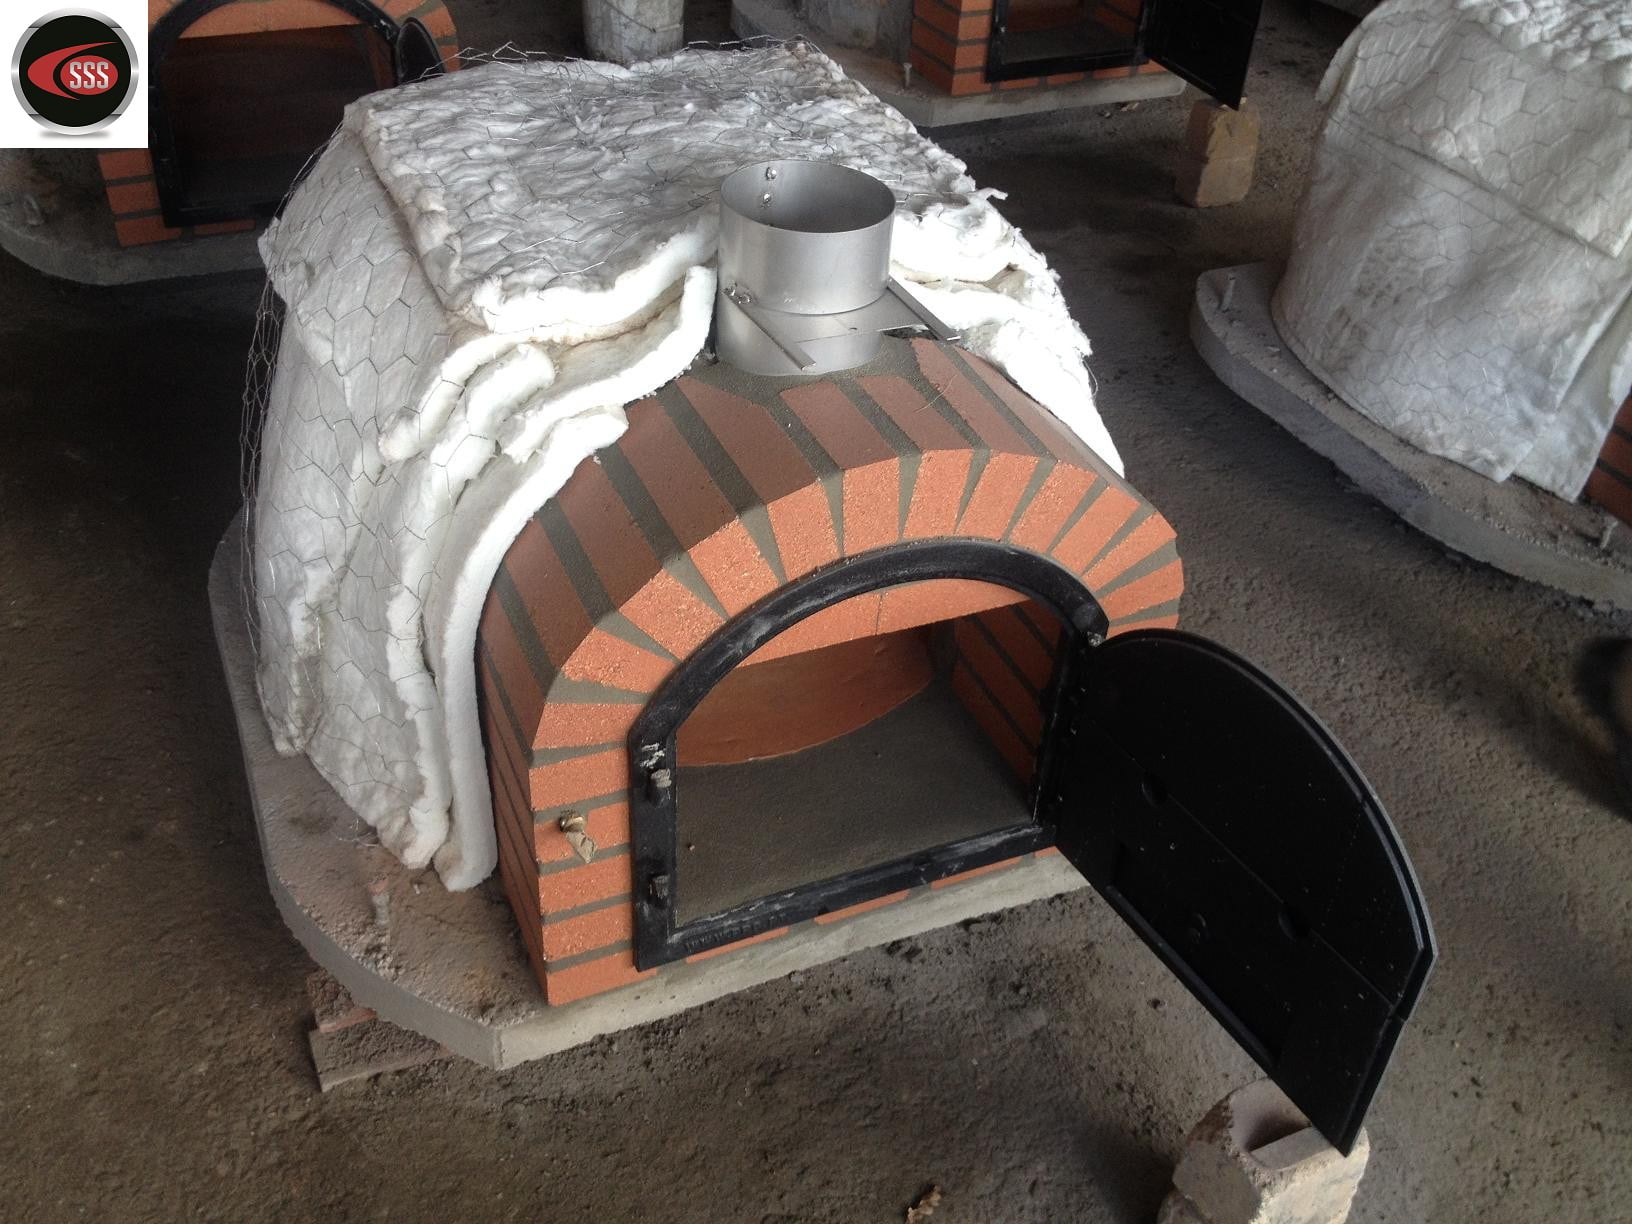 Kilns and More Extra Dense Ceramic Fiber Insulation for Pizza Ovens Ceramic Insulation • Ceramic Fiber Blanket 8# / 2300°F 1 x 24 x 25 Made in USA! Forges 